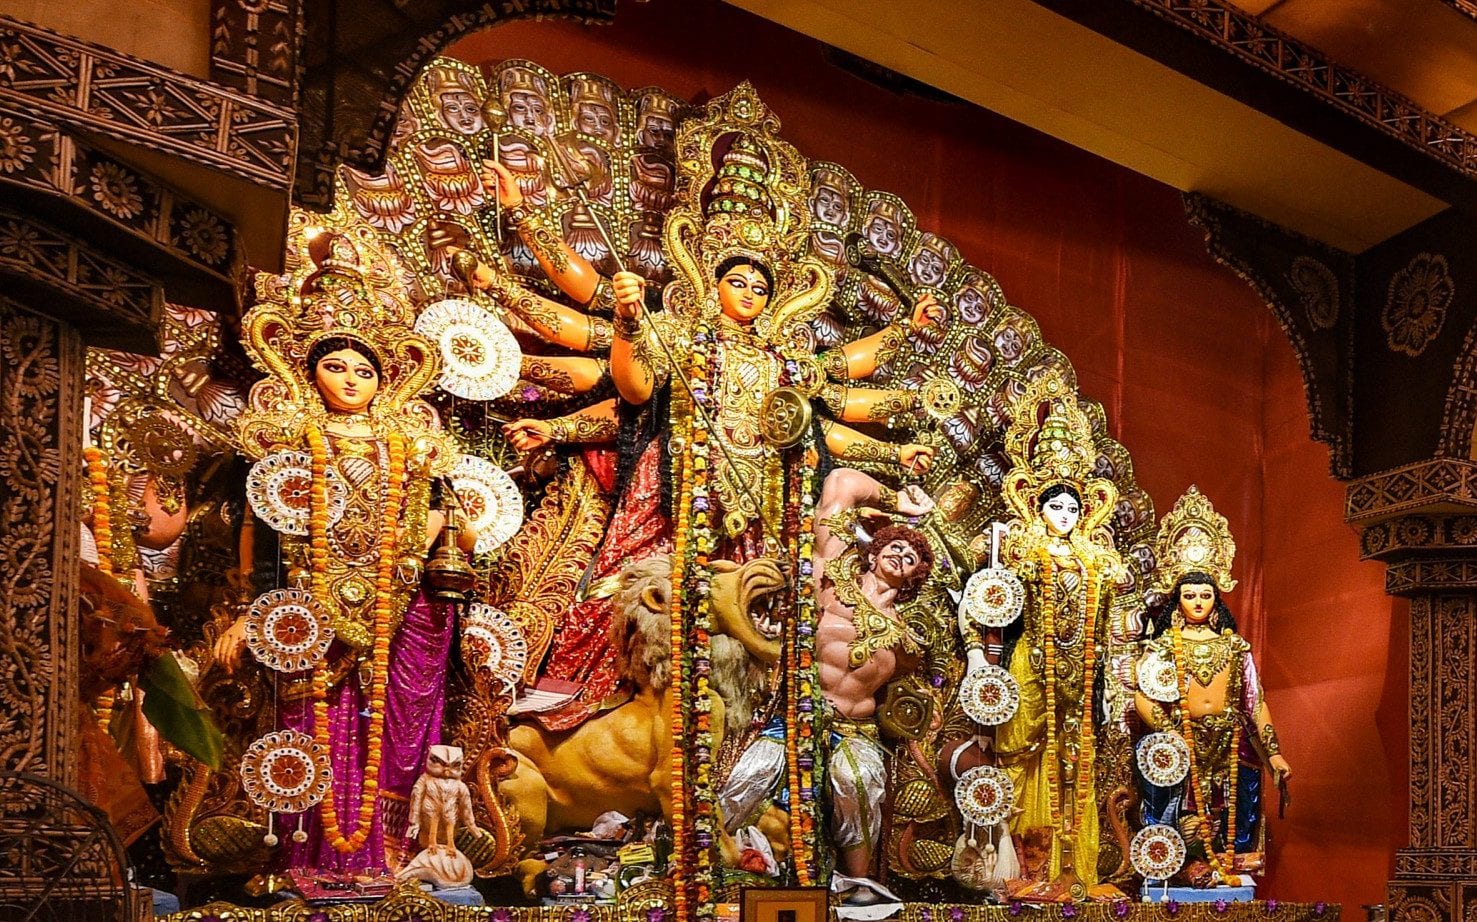 With Durga puja, harmony returns to Bengals hotbed of communal tension